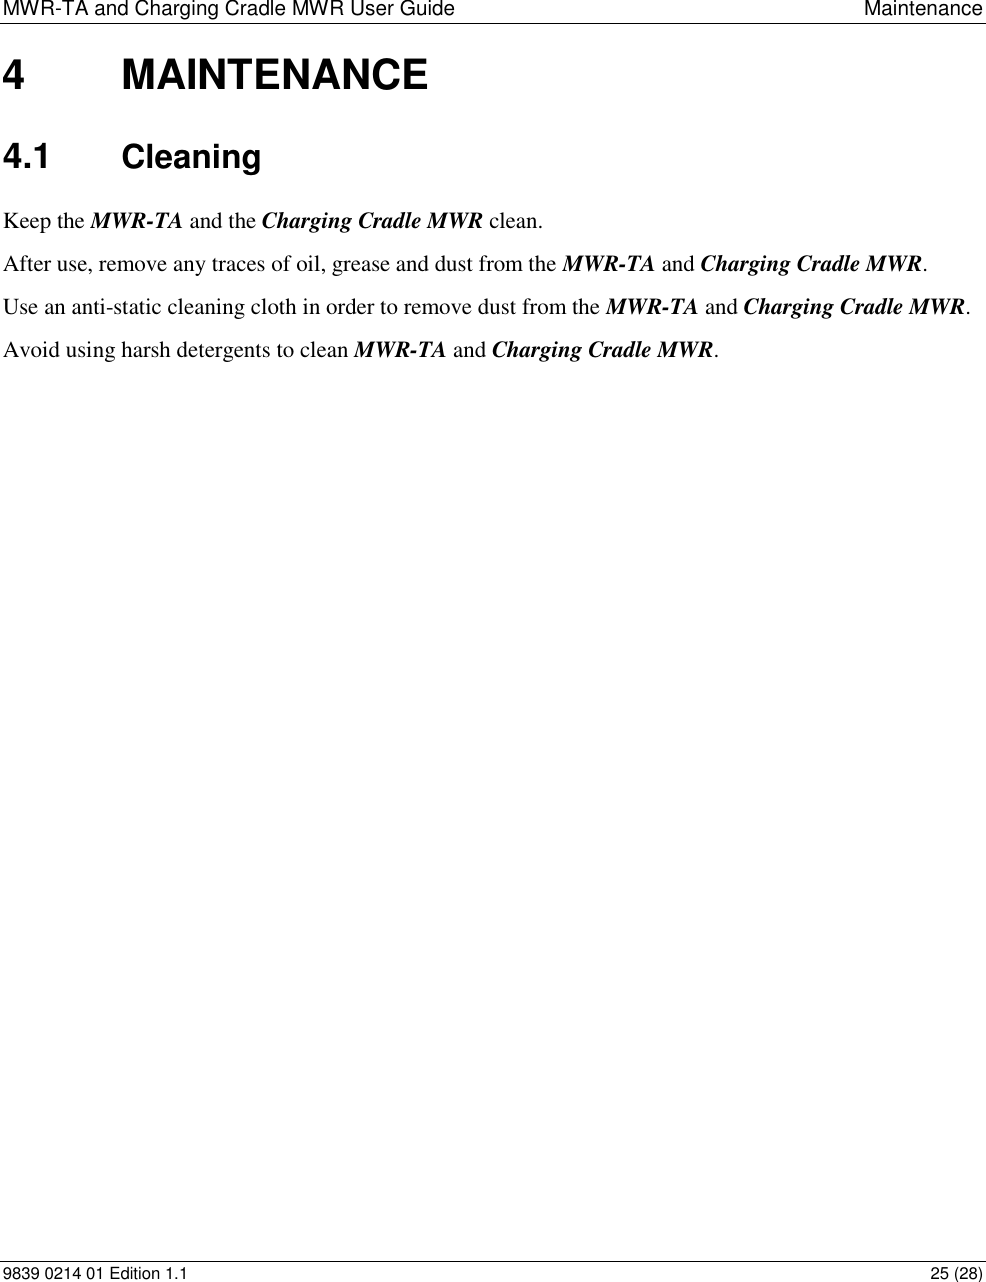 MWR-TA and Charging Cradle MWR User Guide  Maintenance 9839 0214 01 Edition 1.1  25 (28) 4  MAINTENANCE 4.1  Cleaning Keep the MWR-TA and the Charging Cradle MWR clean. After use, remove any traces of oil, grease and dust from the MWR-TA and Charging Cradle MWR. Use an anti-static cleaning cloth in order to remove dust from the MWR-TA and Charging Cradle MWR. Avoid using harsh detergents to clean MWR-TA and Charging Cradle MWR.  